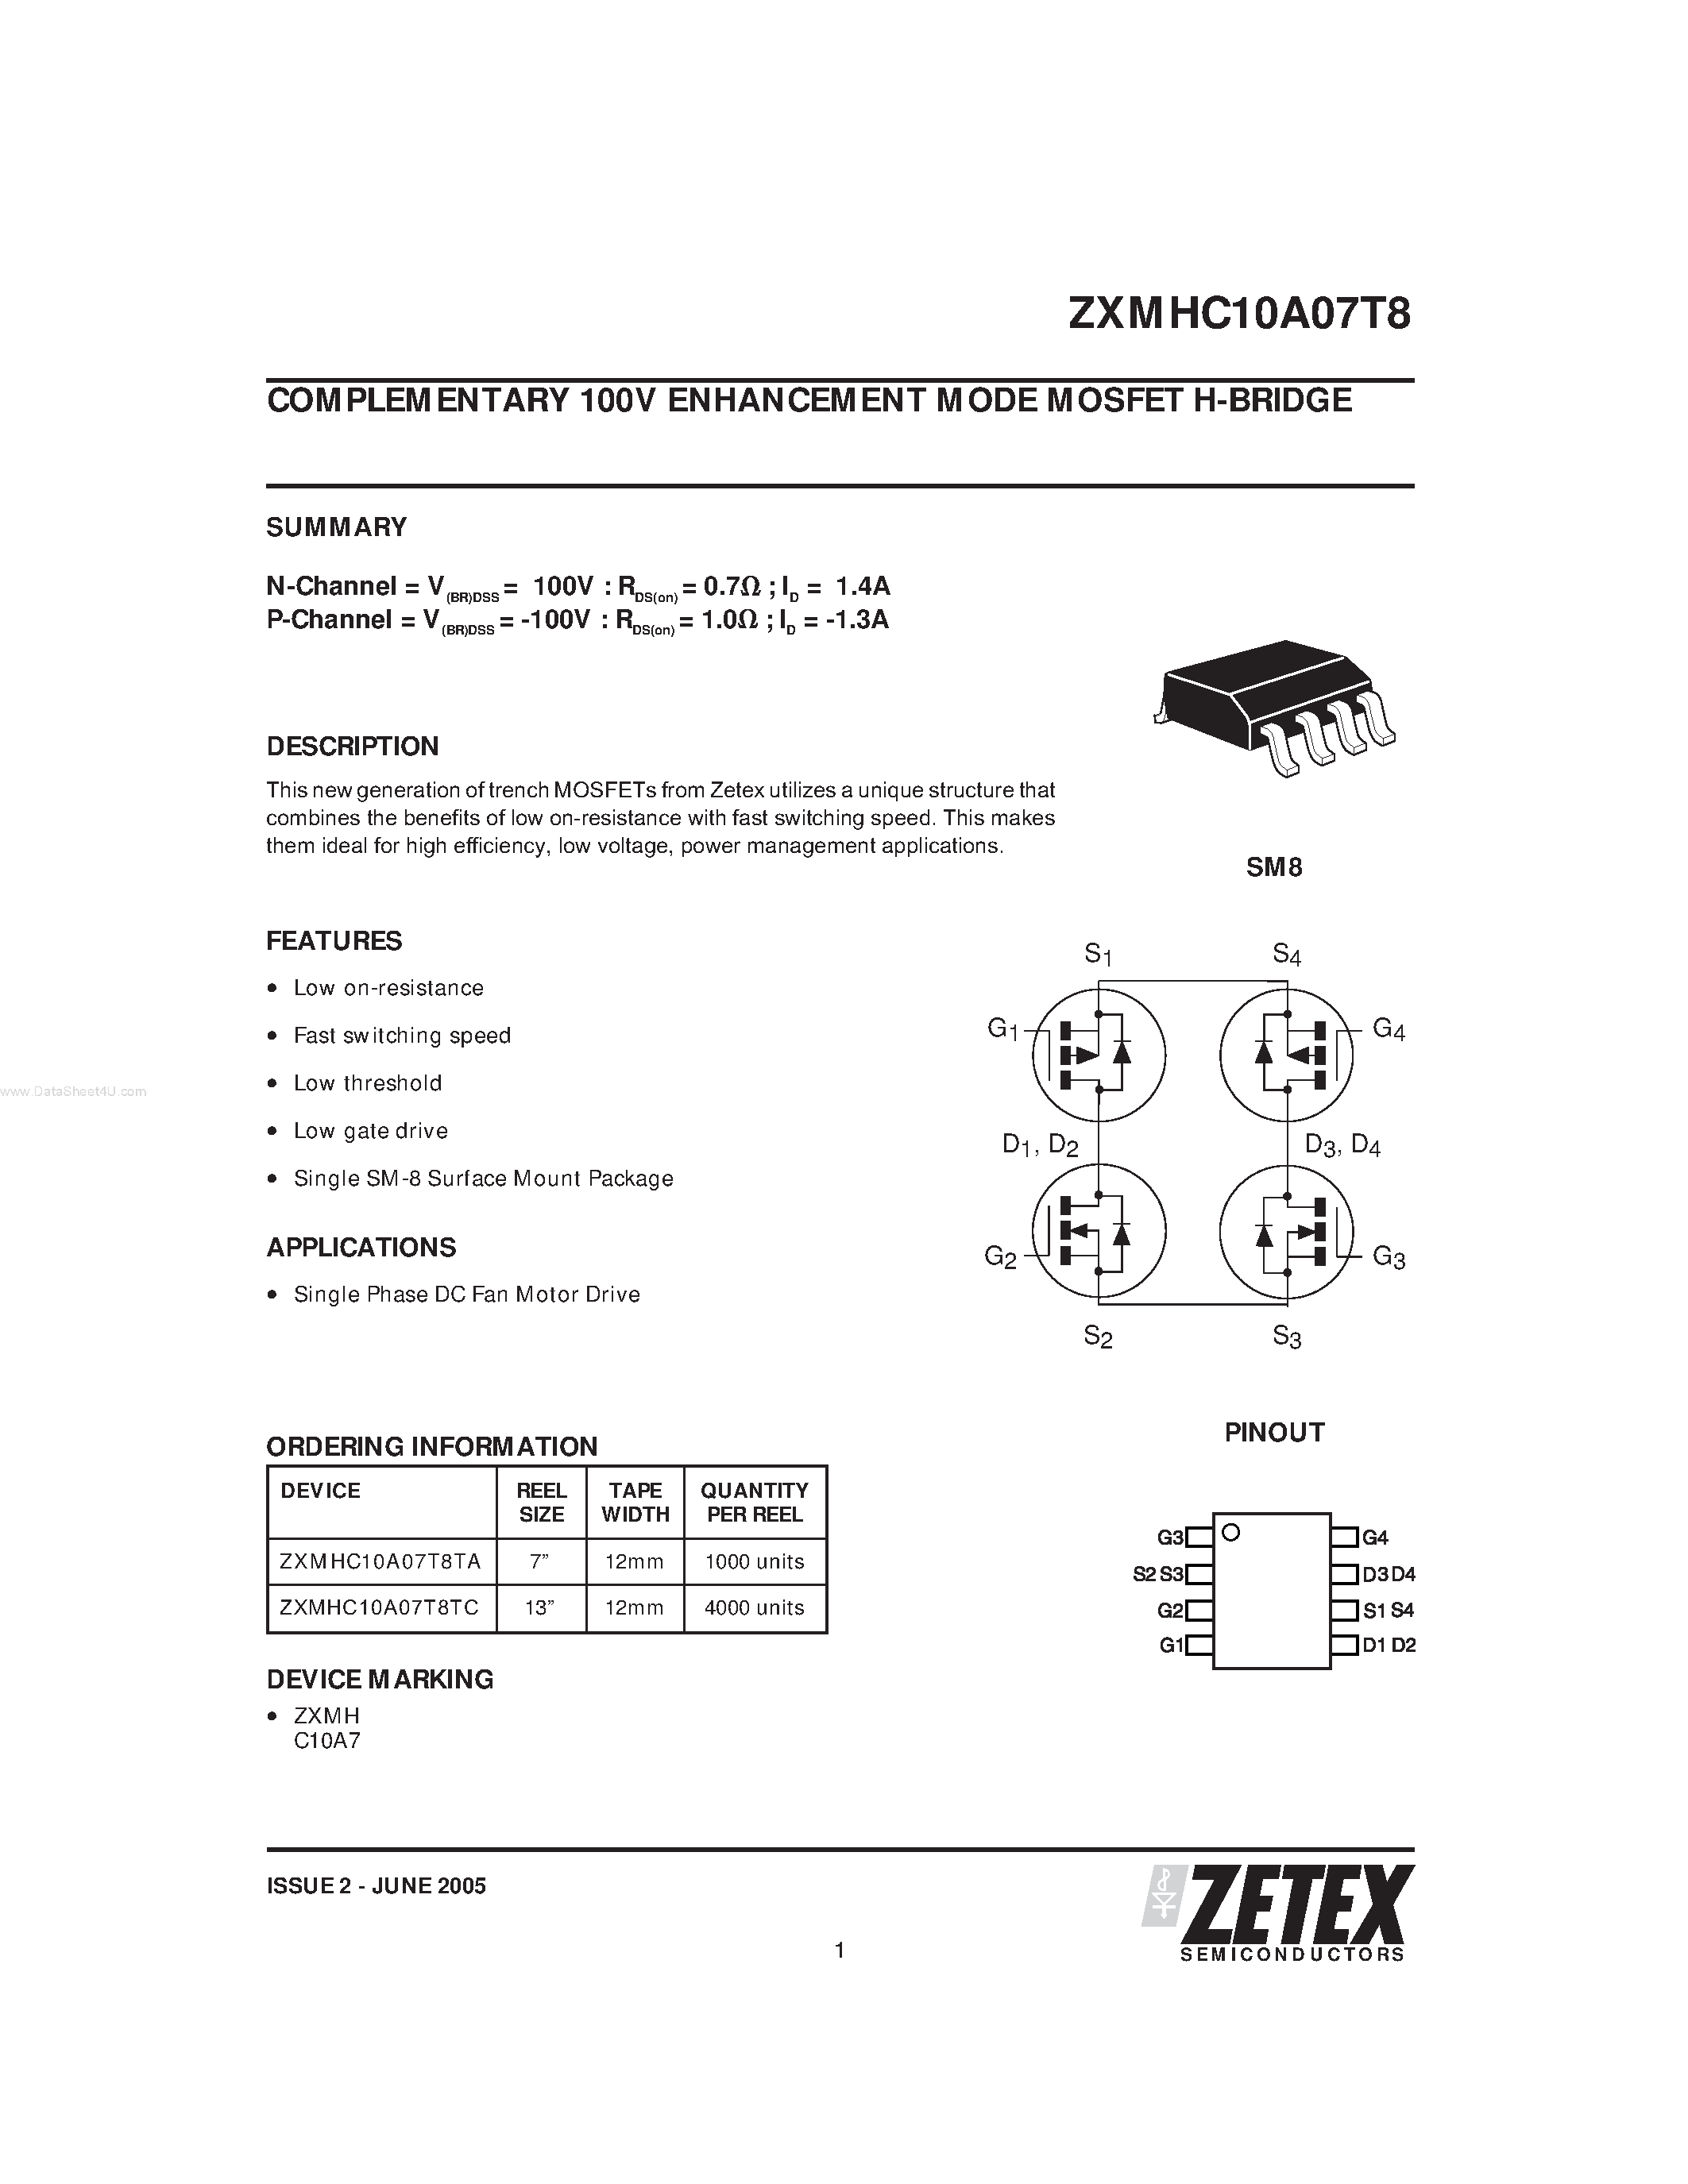 Datasheet ZXMHC10A07T8 - COMPLEMENTARY 100V ENHANCEMENT MODE MOSFET H-BRIDGE page 1